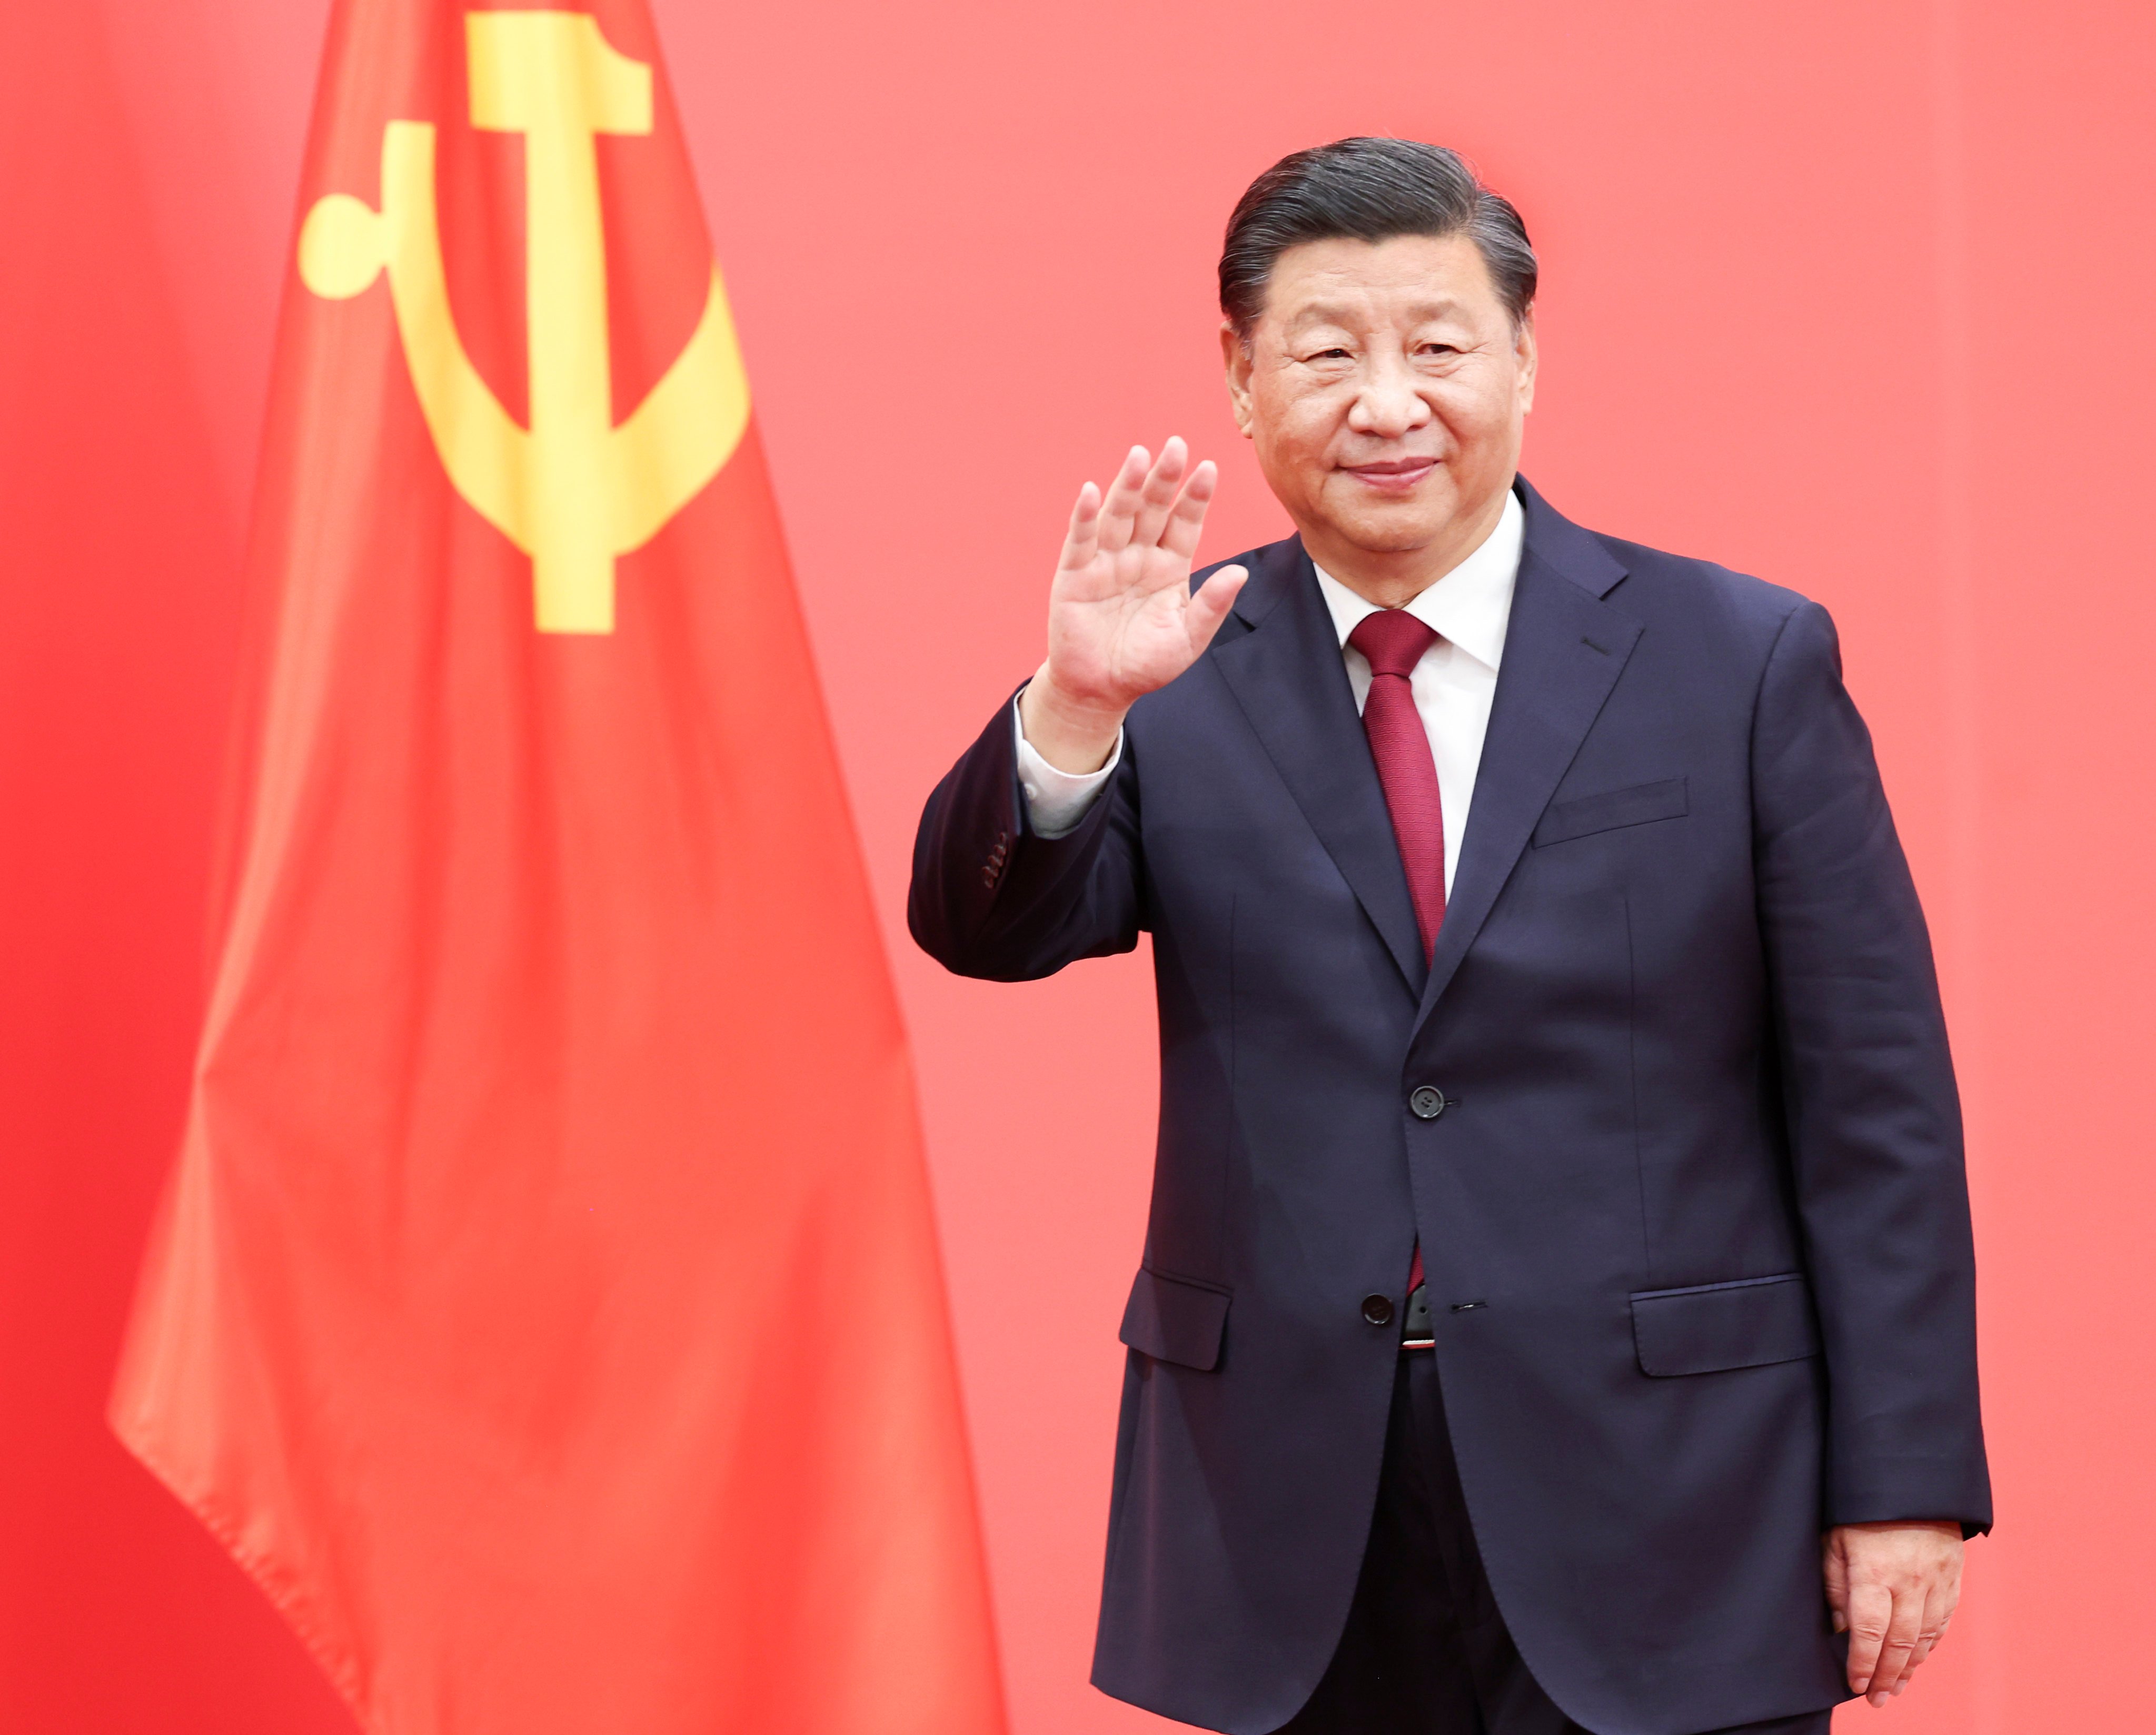 Xi Jinping, general secretary of the Communist Party of China (CPC) Central Committee. Photo: Xinhua/File